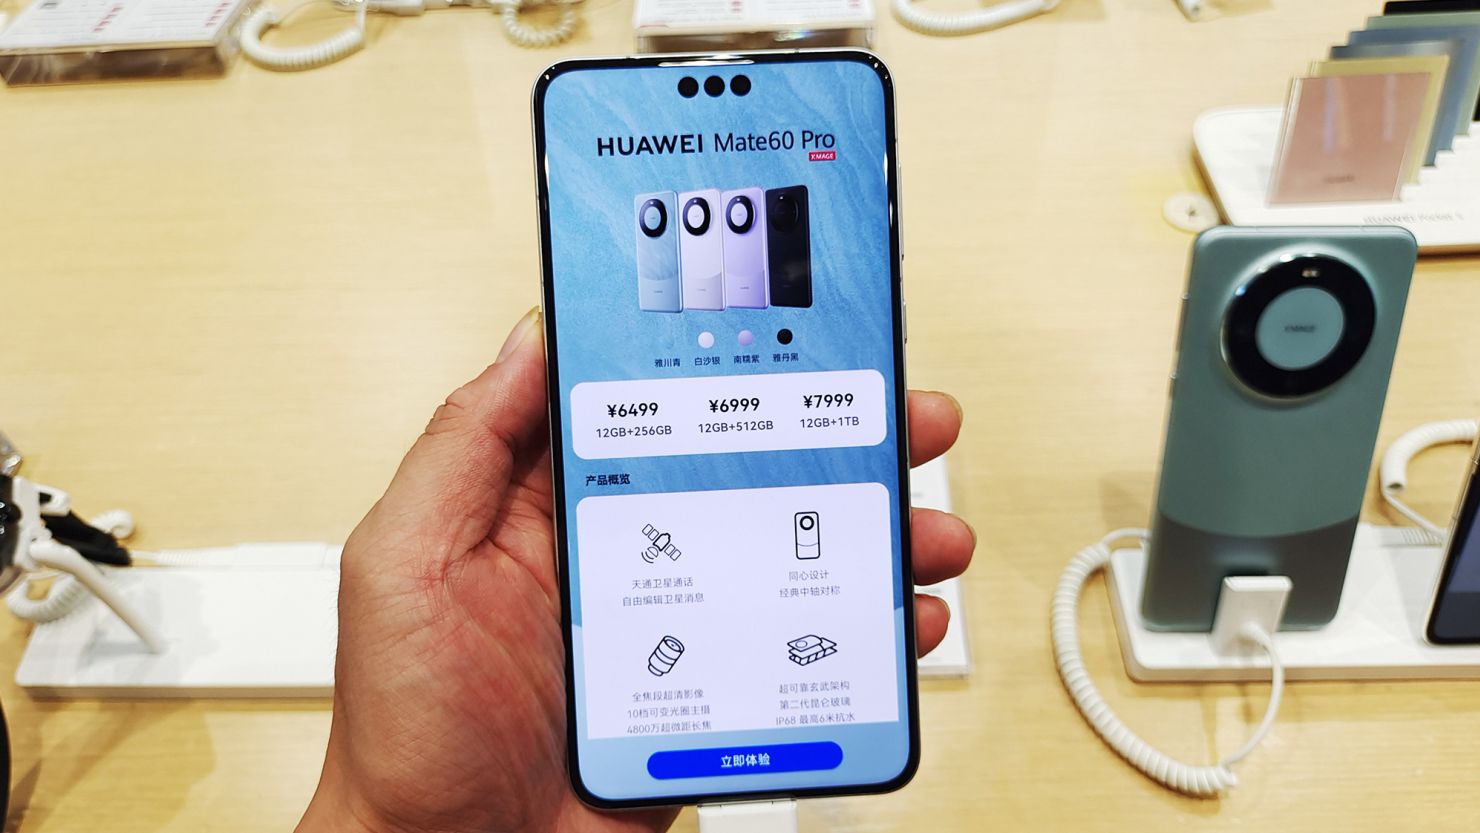 Huwaei Mate 60 Pro: The US government is investigating China's